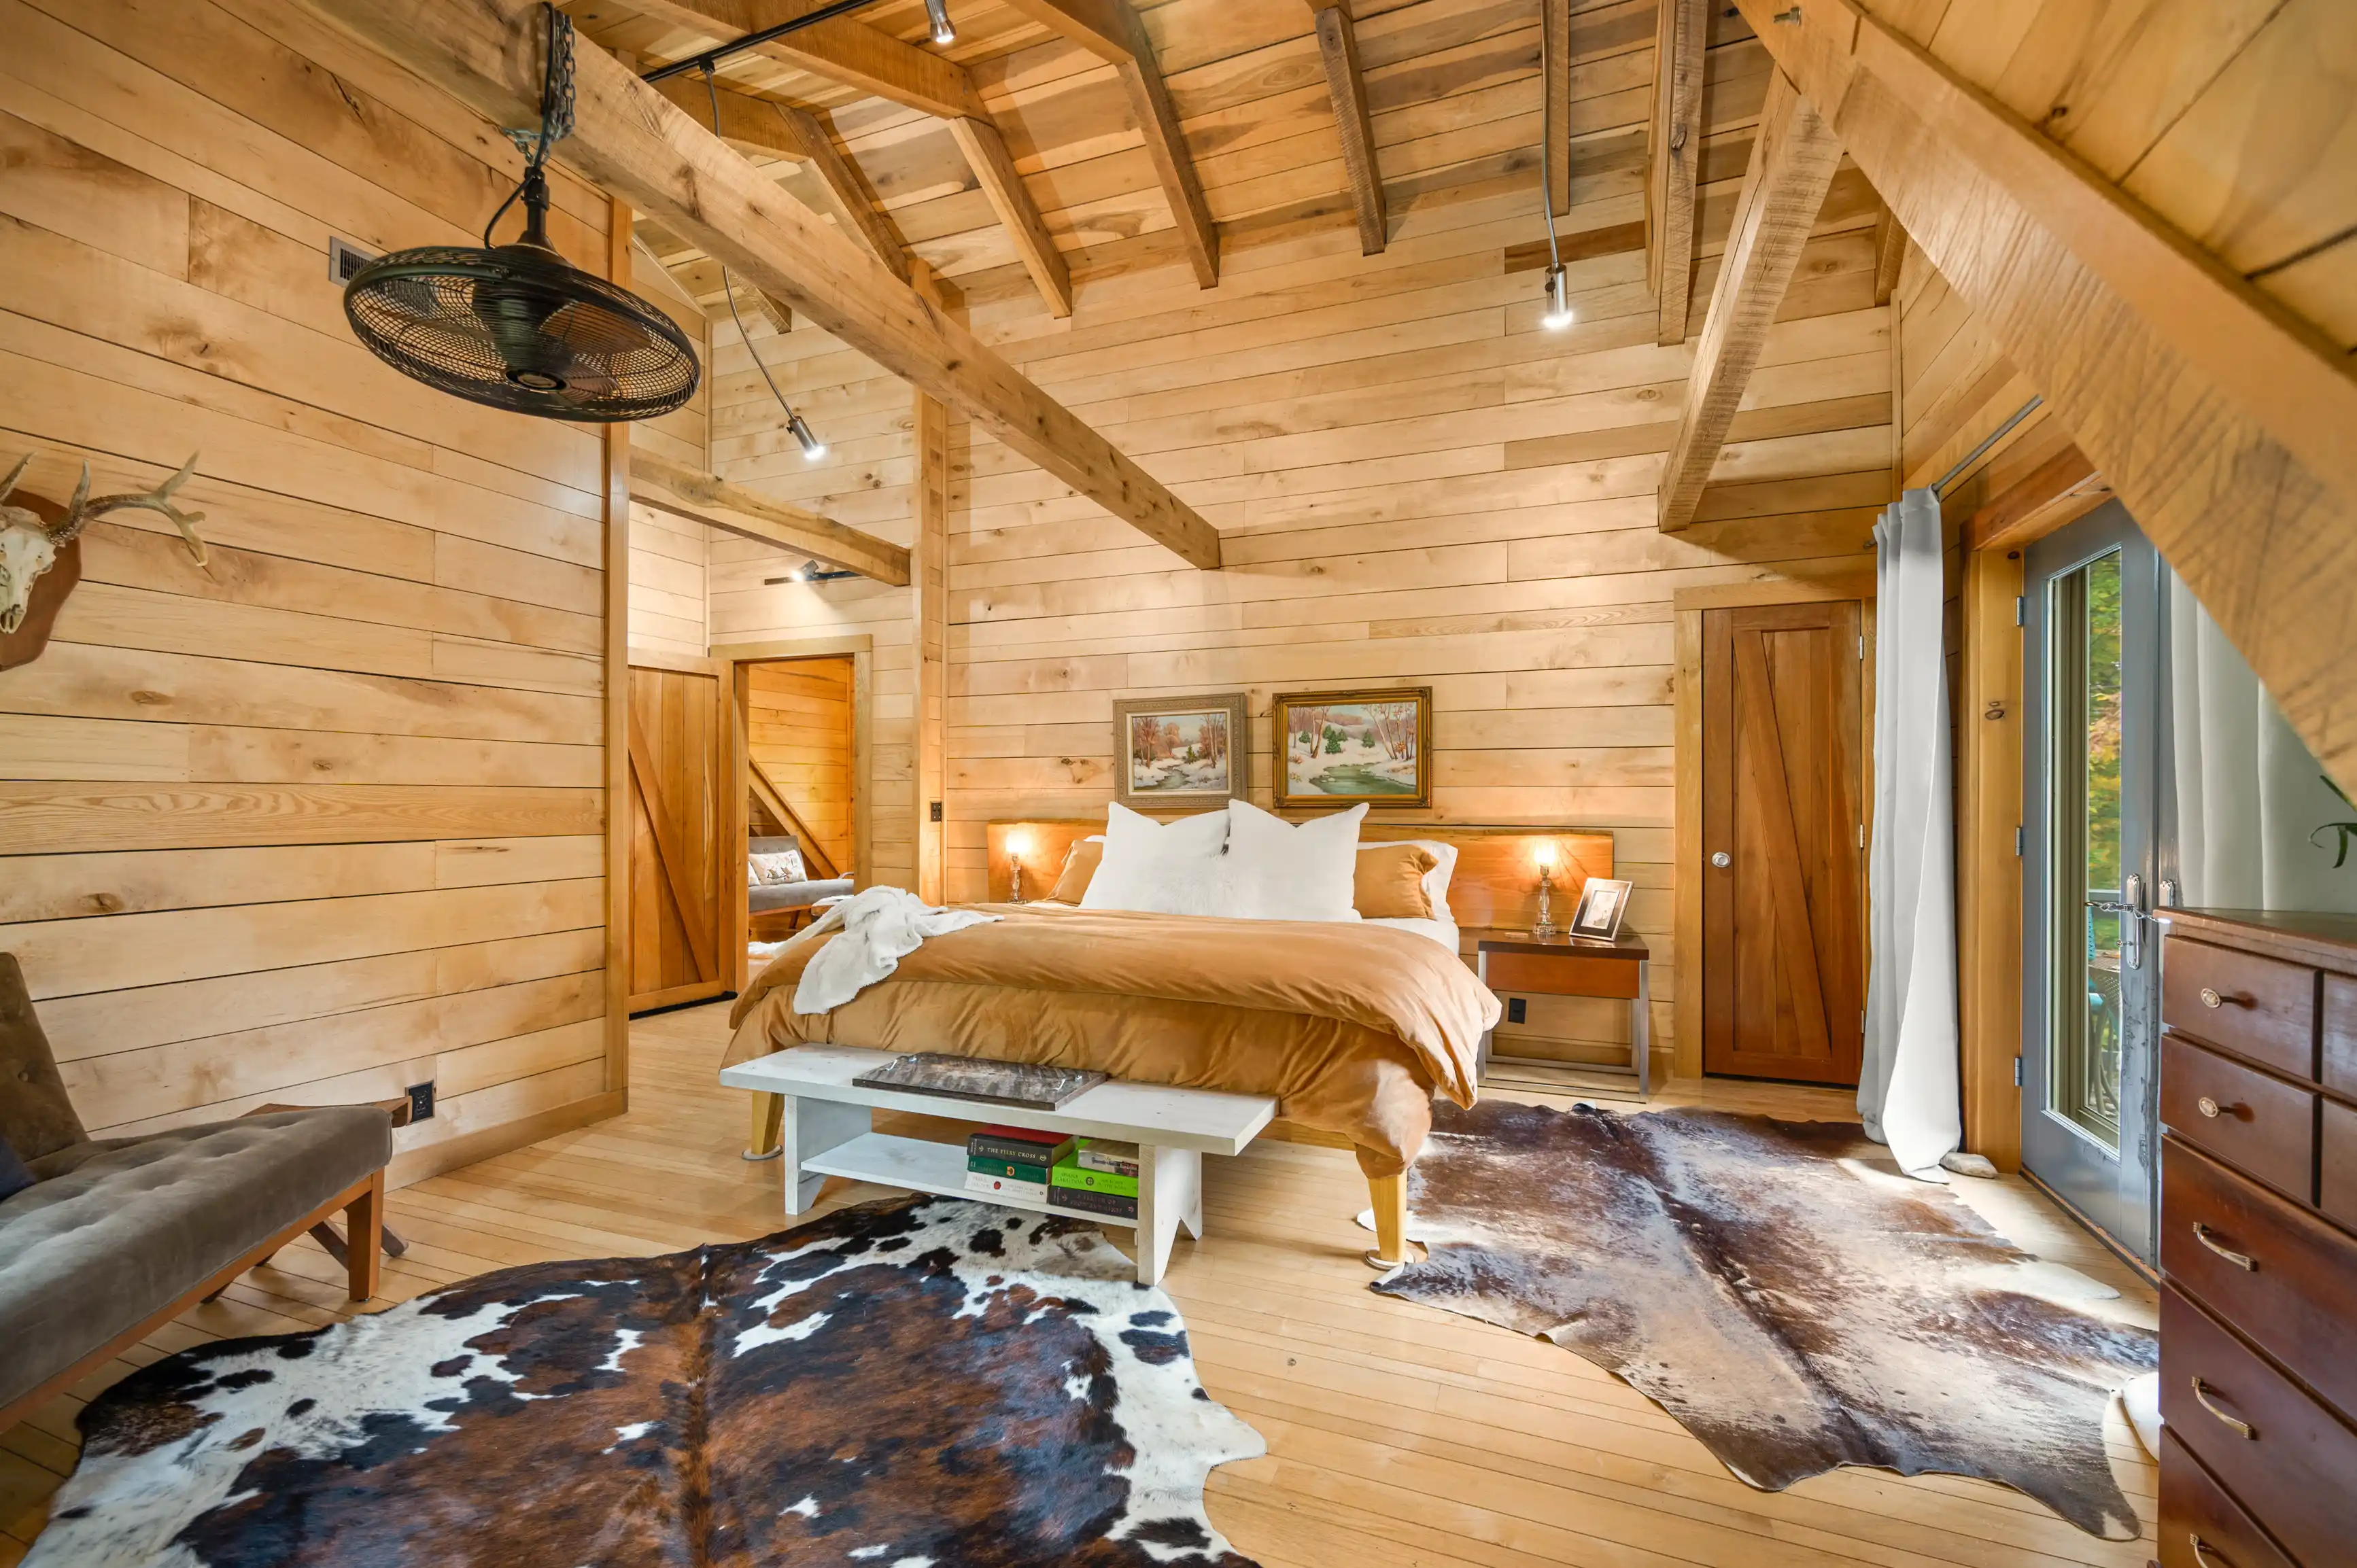 Cozy rustic bedroom with wooden walls and beams, featuring a queen-sized bed with beige bedding, a fur rug on the floor, and a ceiling fan above.